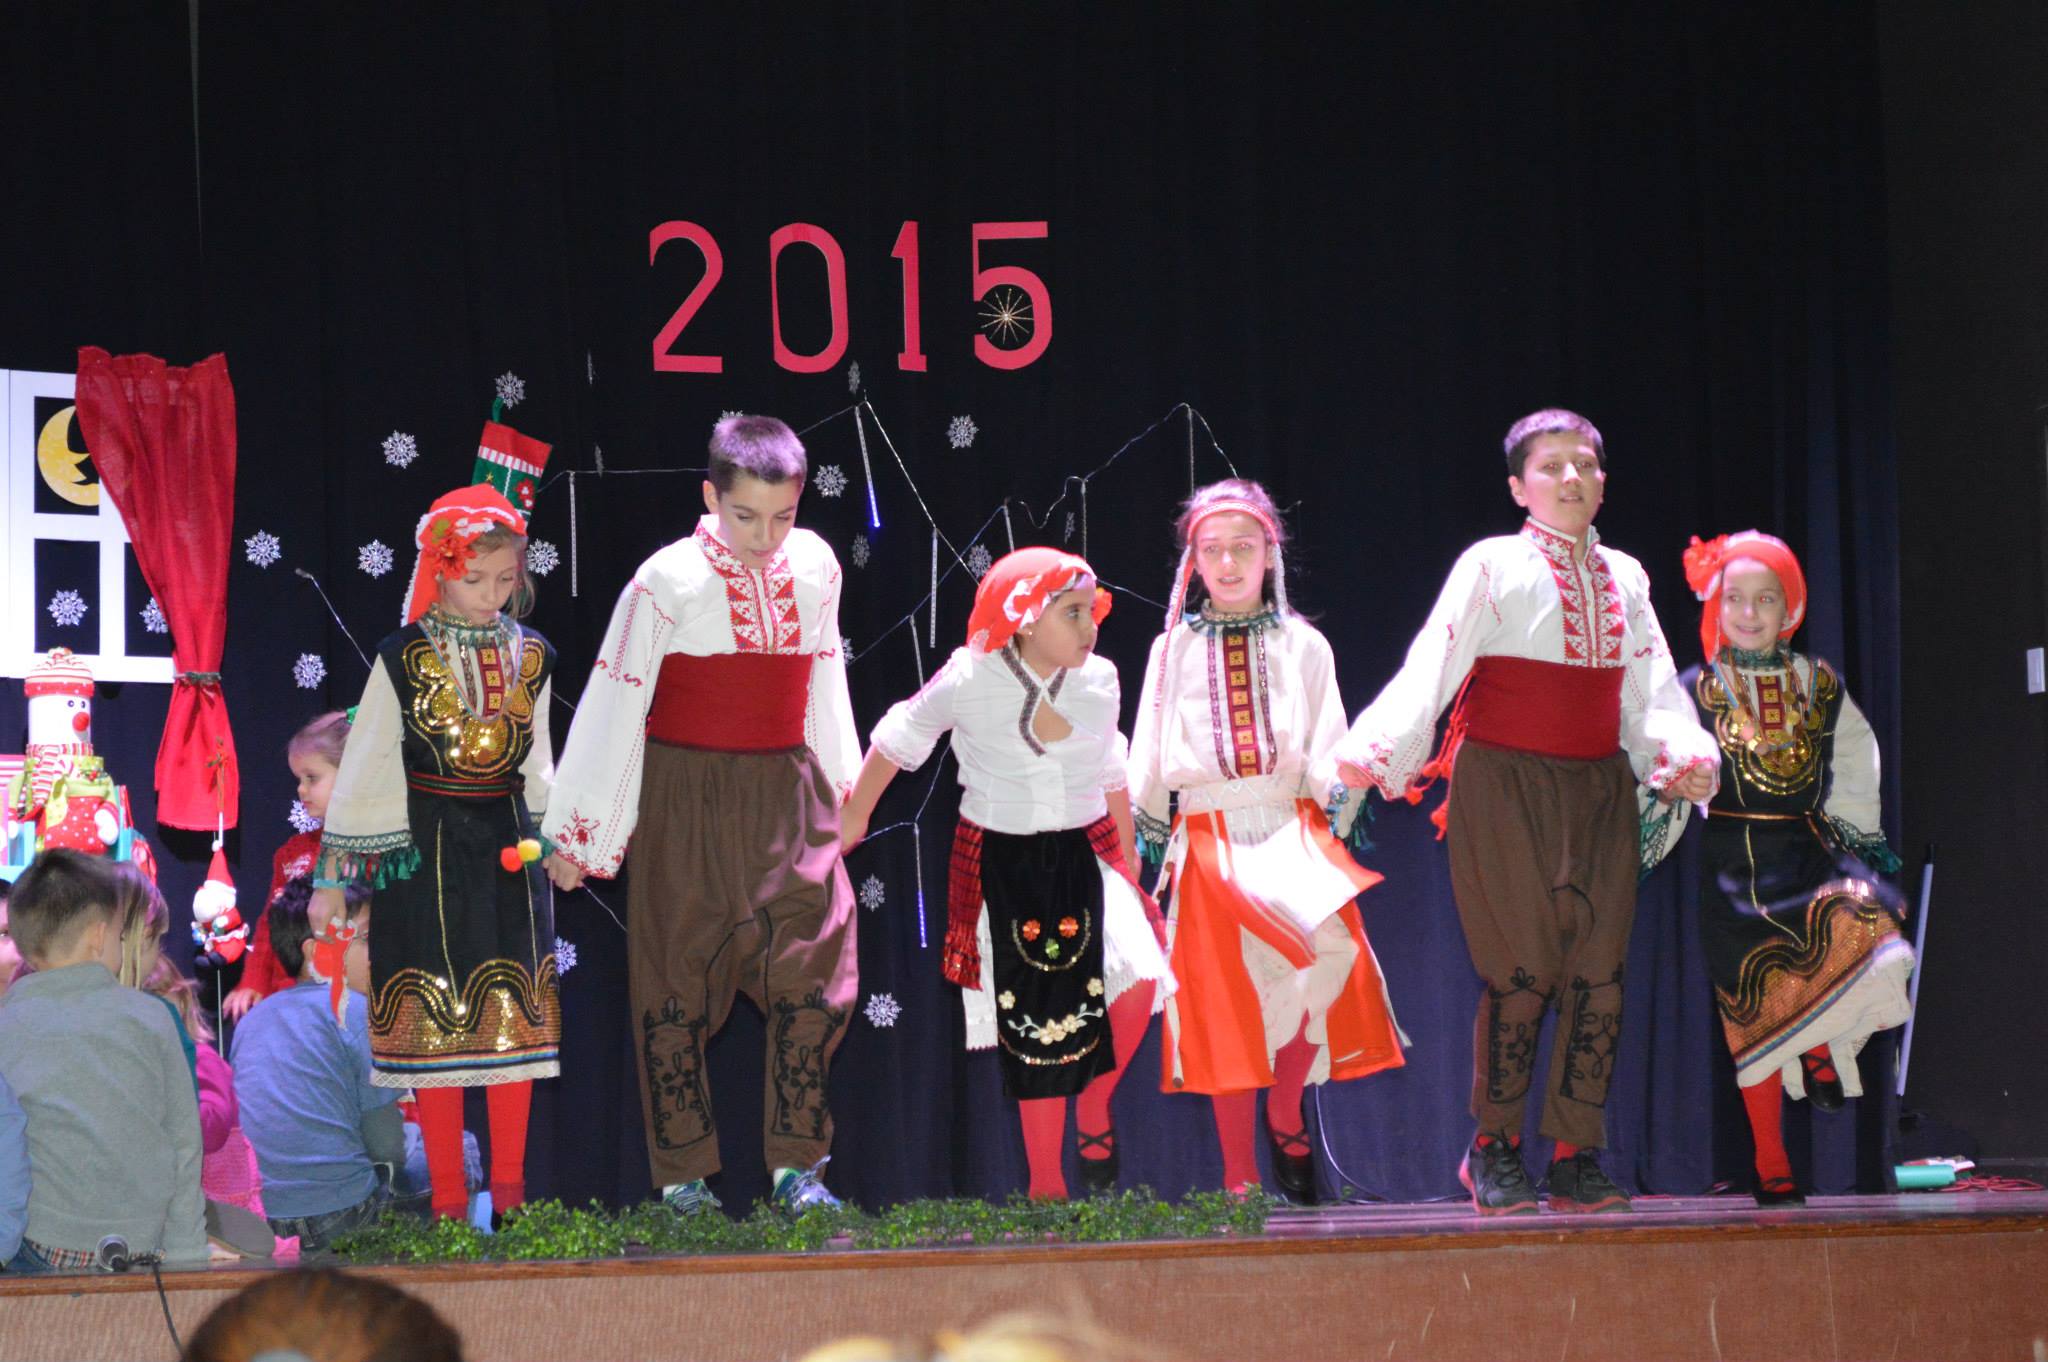 The students are introduced to some of the Bulgarian traditions and learn the beautiful Bulgarian folklore dances.